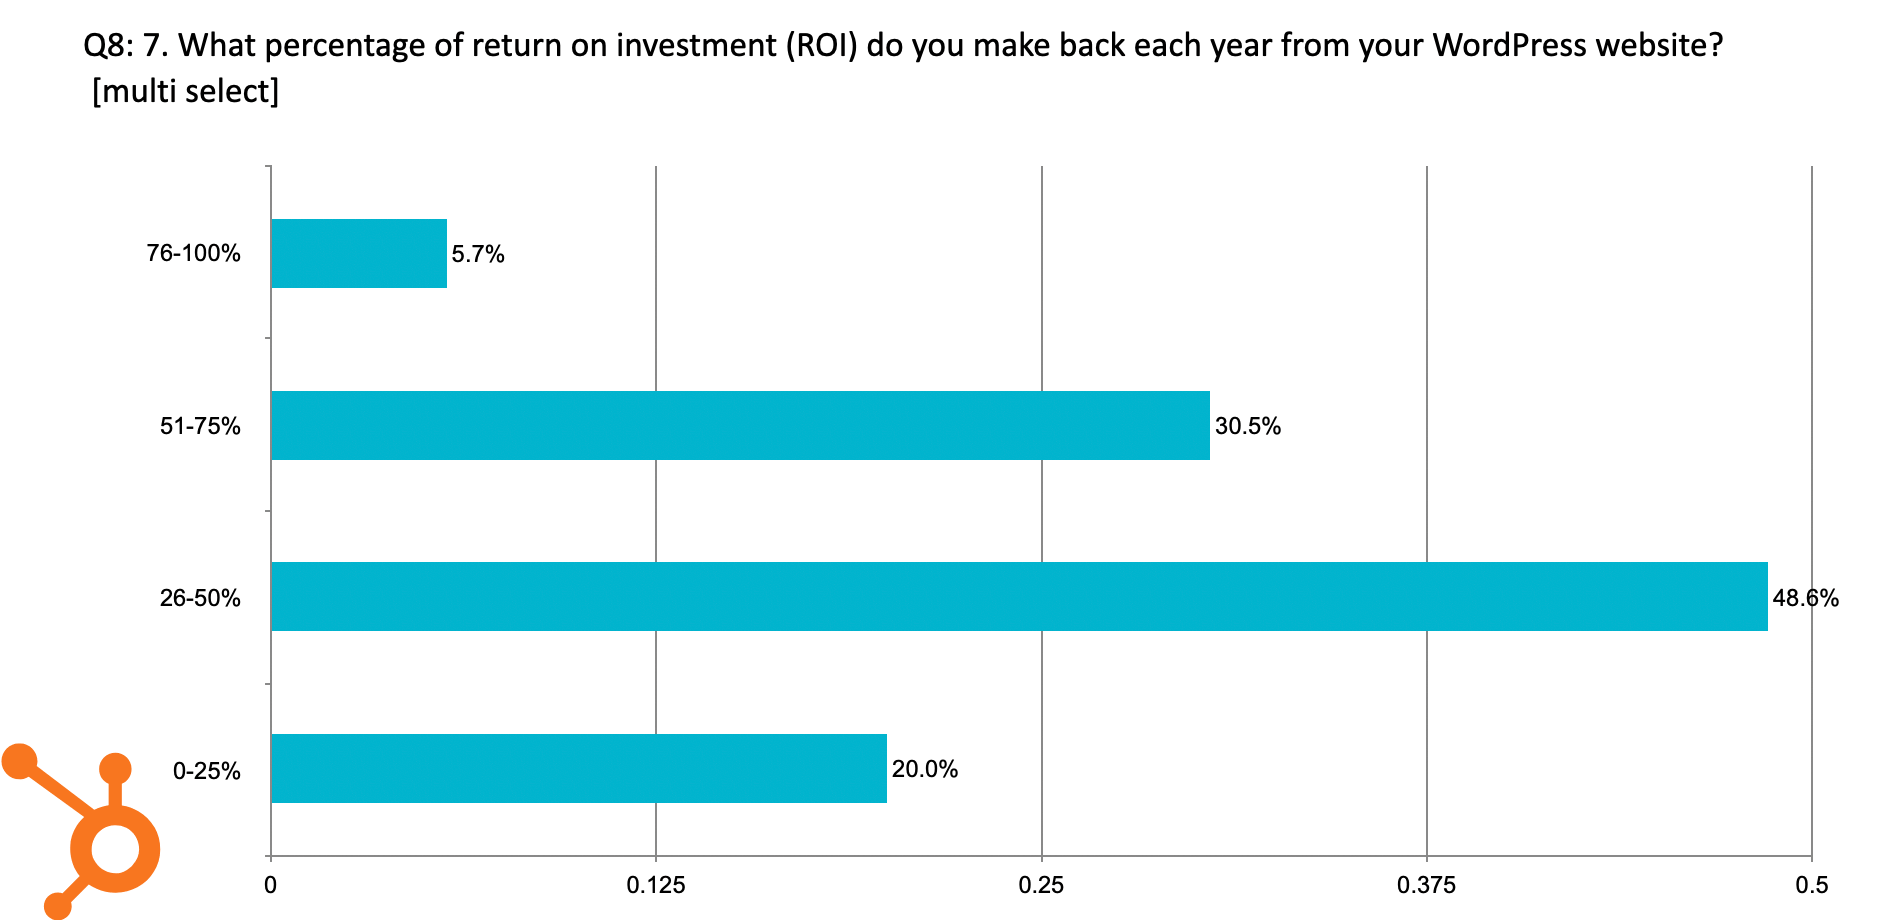 what % of ROI do you make back each year from your WP website? 20% say 0-25% ROI, 48.6% say 26-50% ROI, 30.5% say 51-75% ROI, and 5.7% say 76-100% ROI